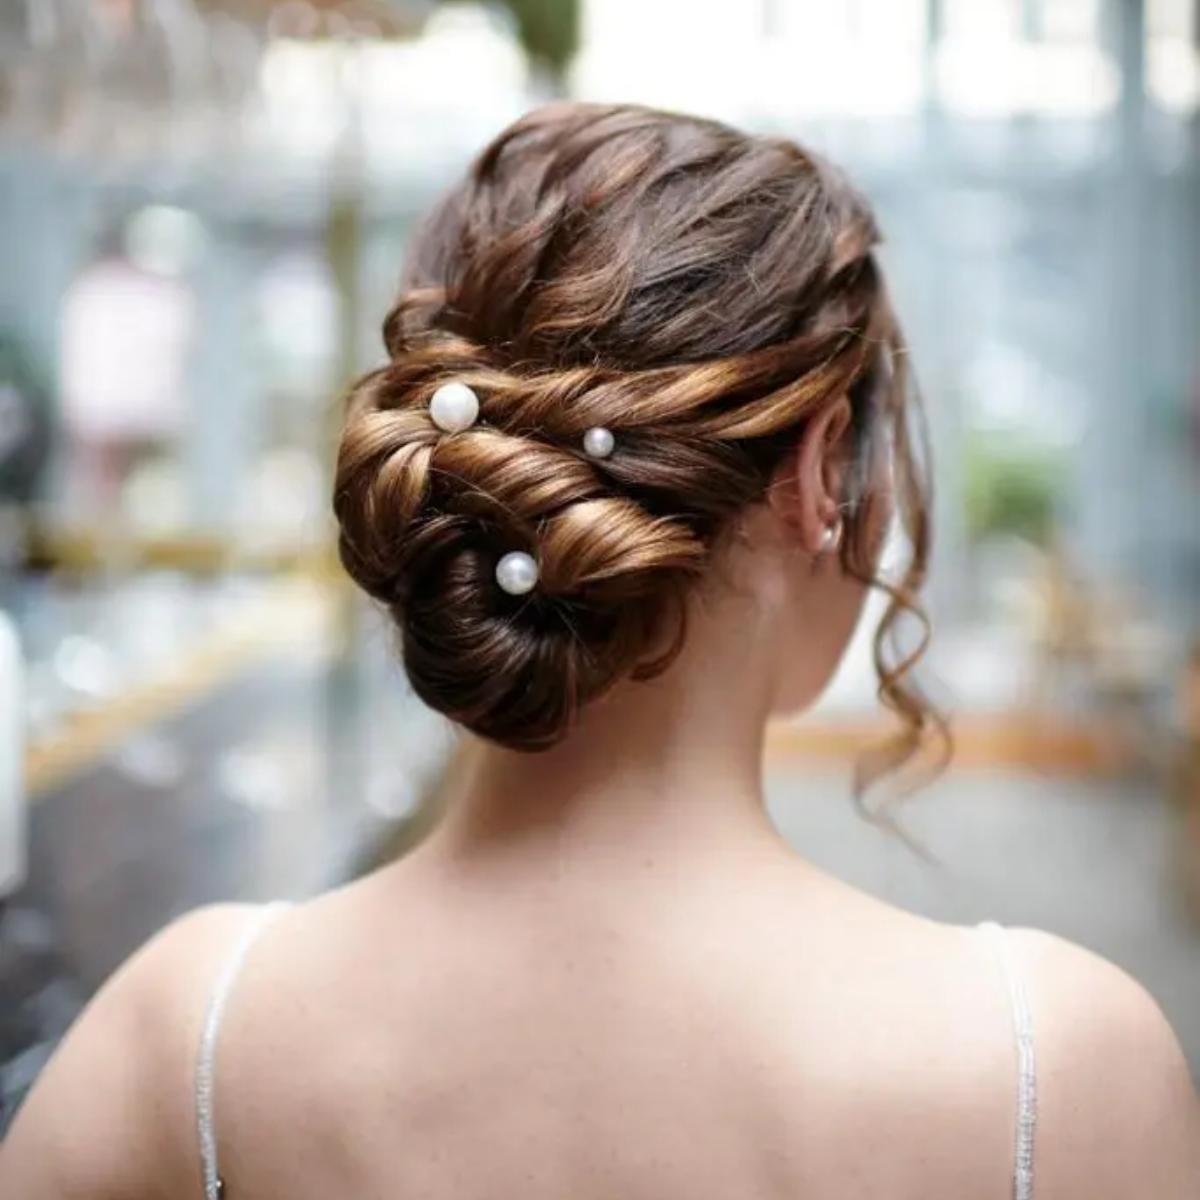 Wedding Hairstyles You'll Fall in Love With | Inecto